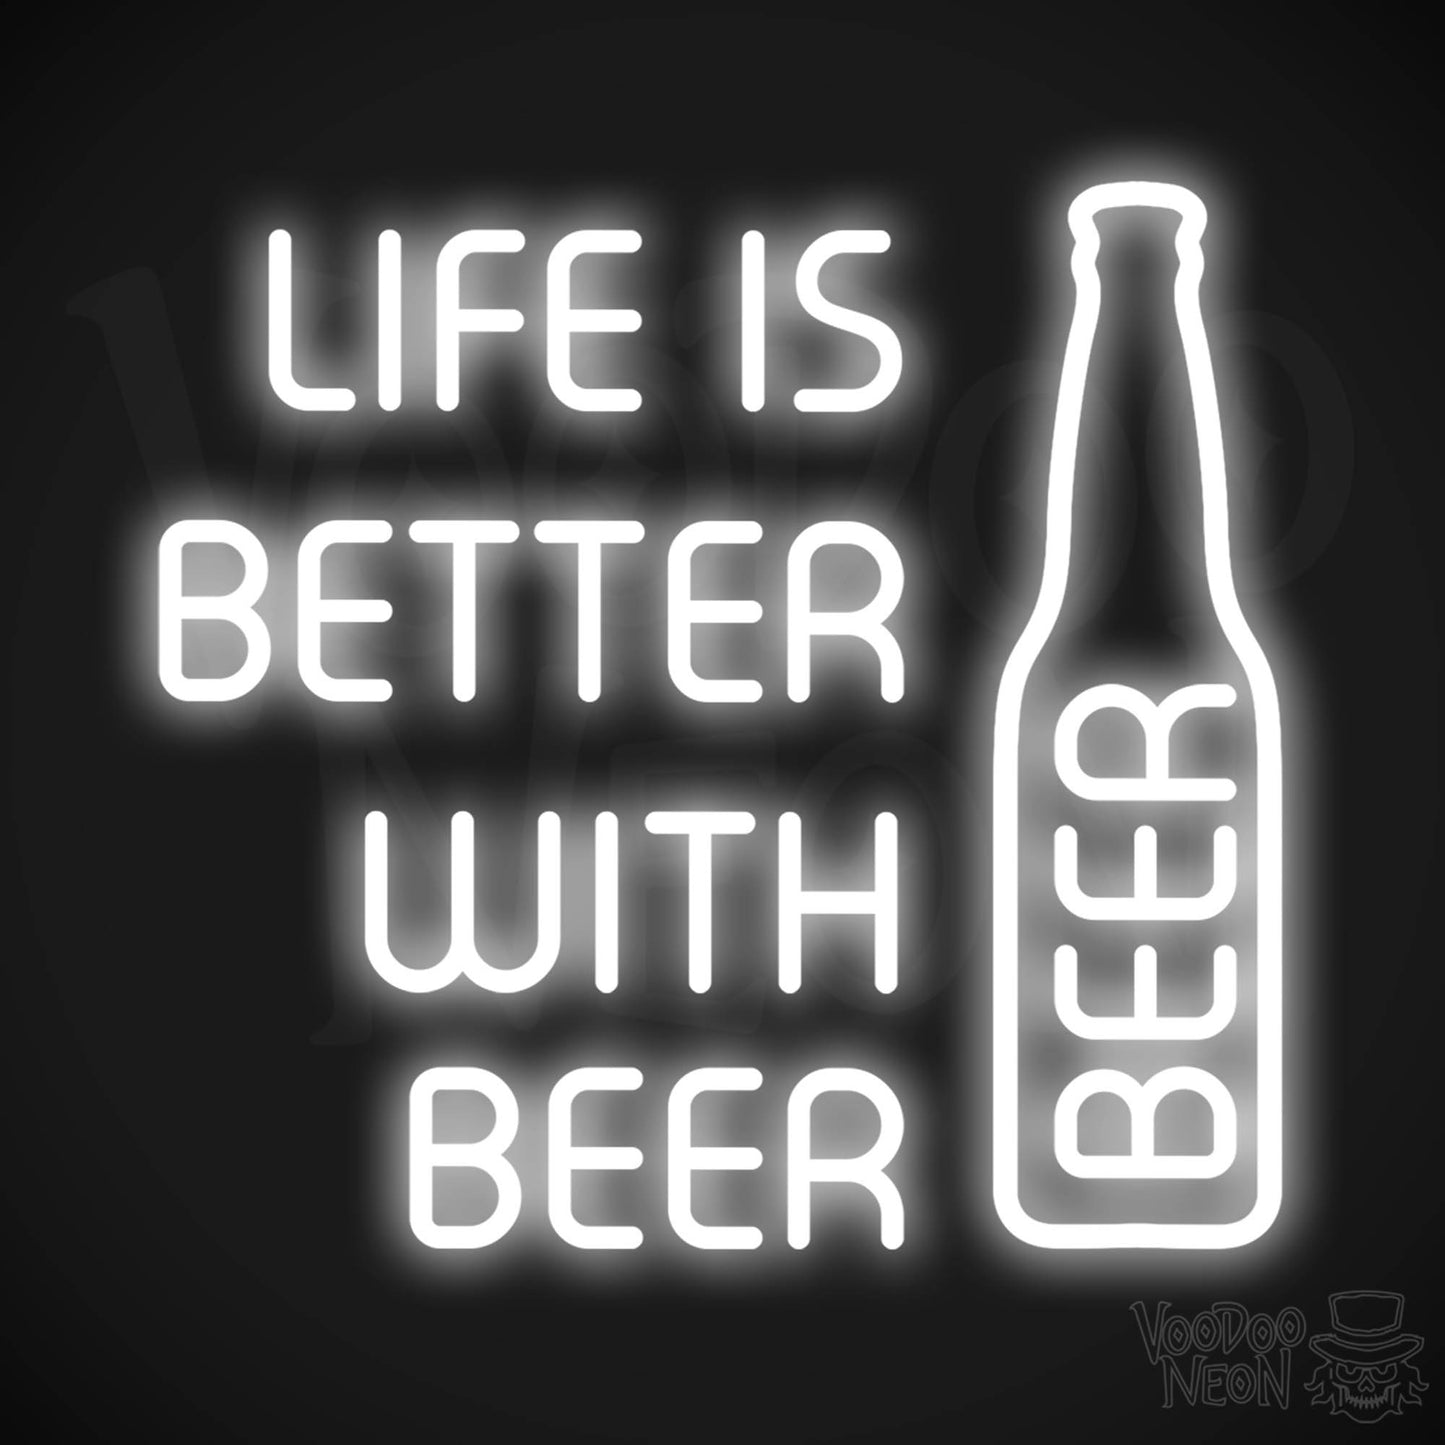 Life Is Better With Beer LED Neon - White